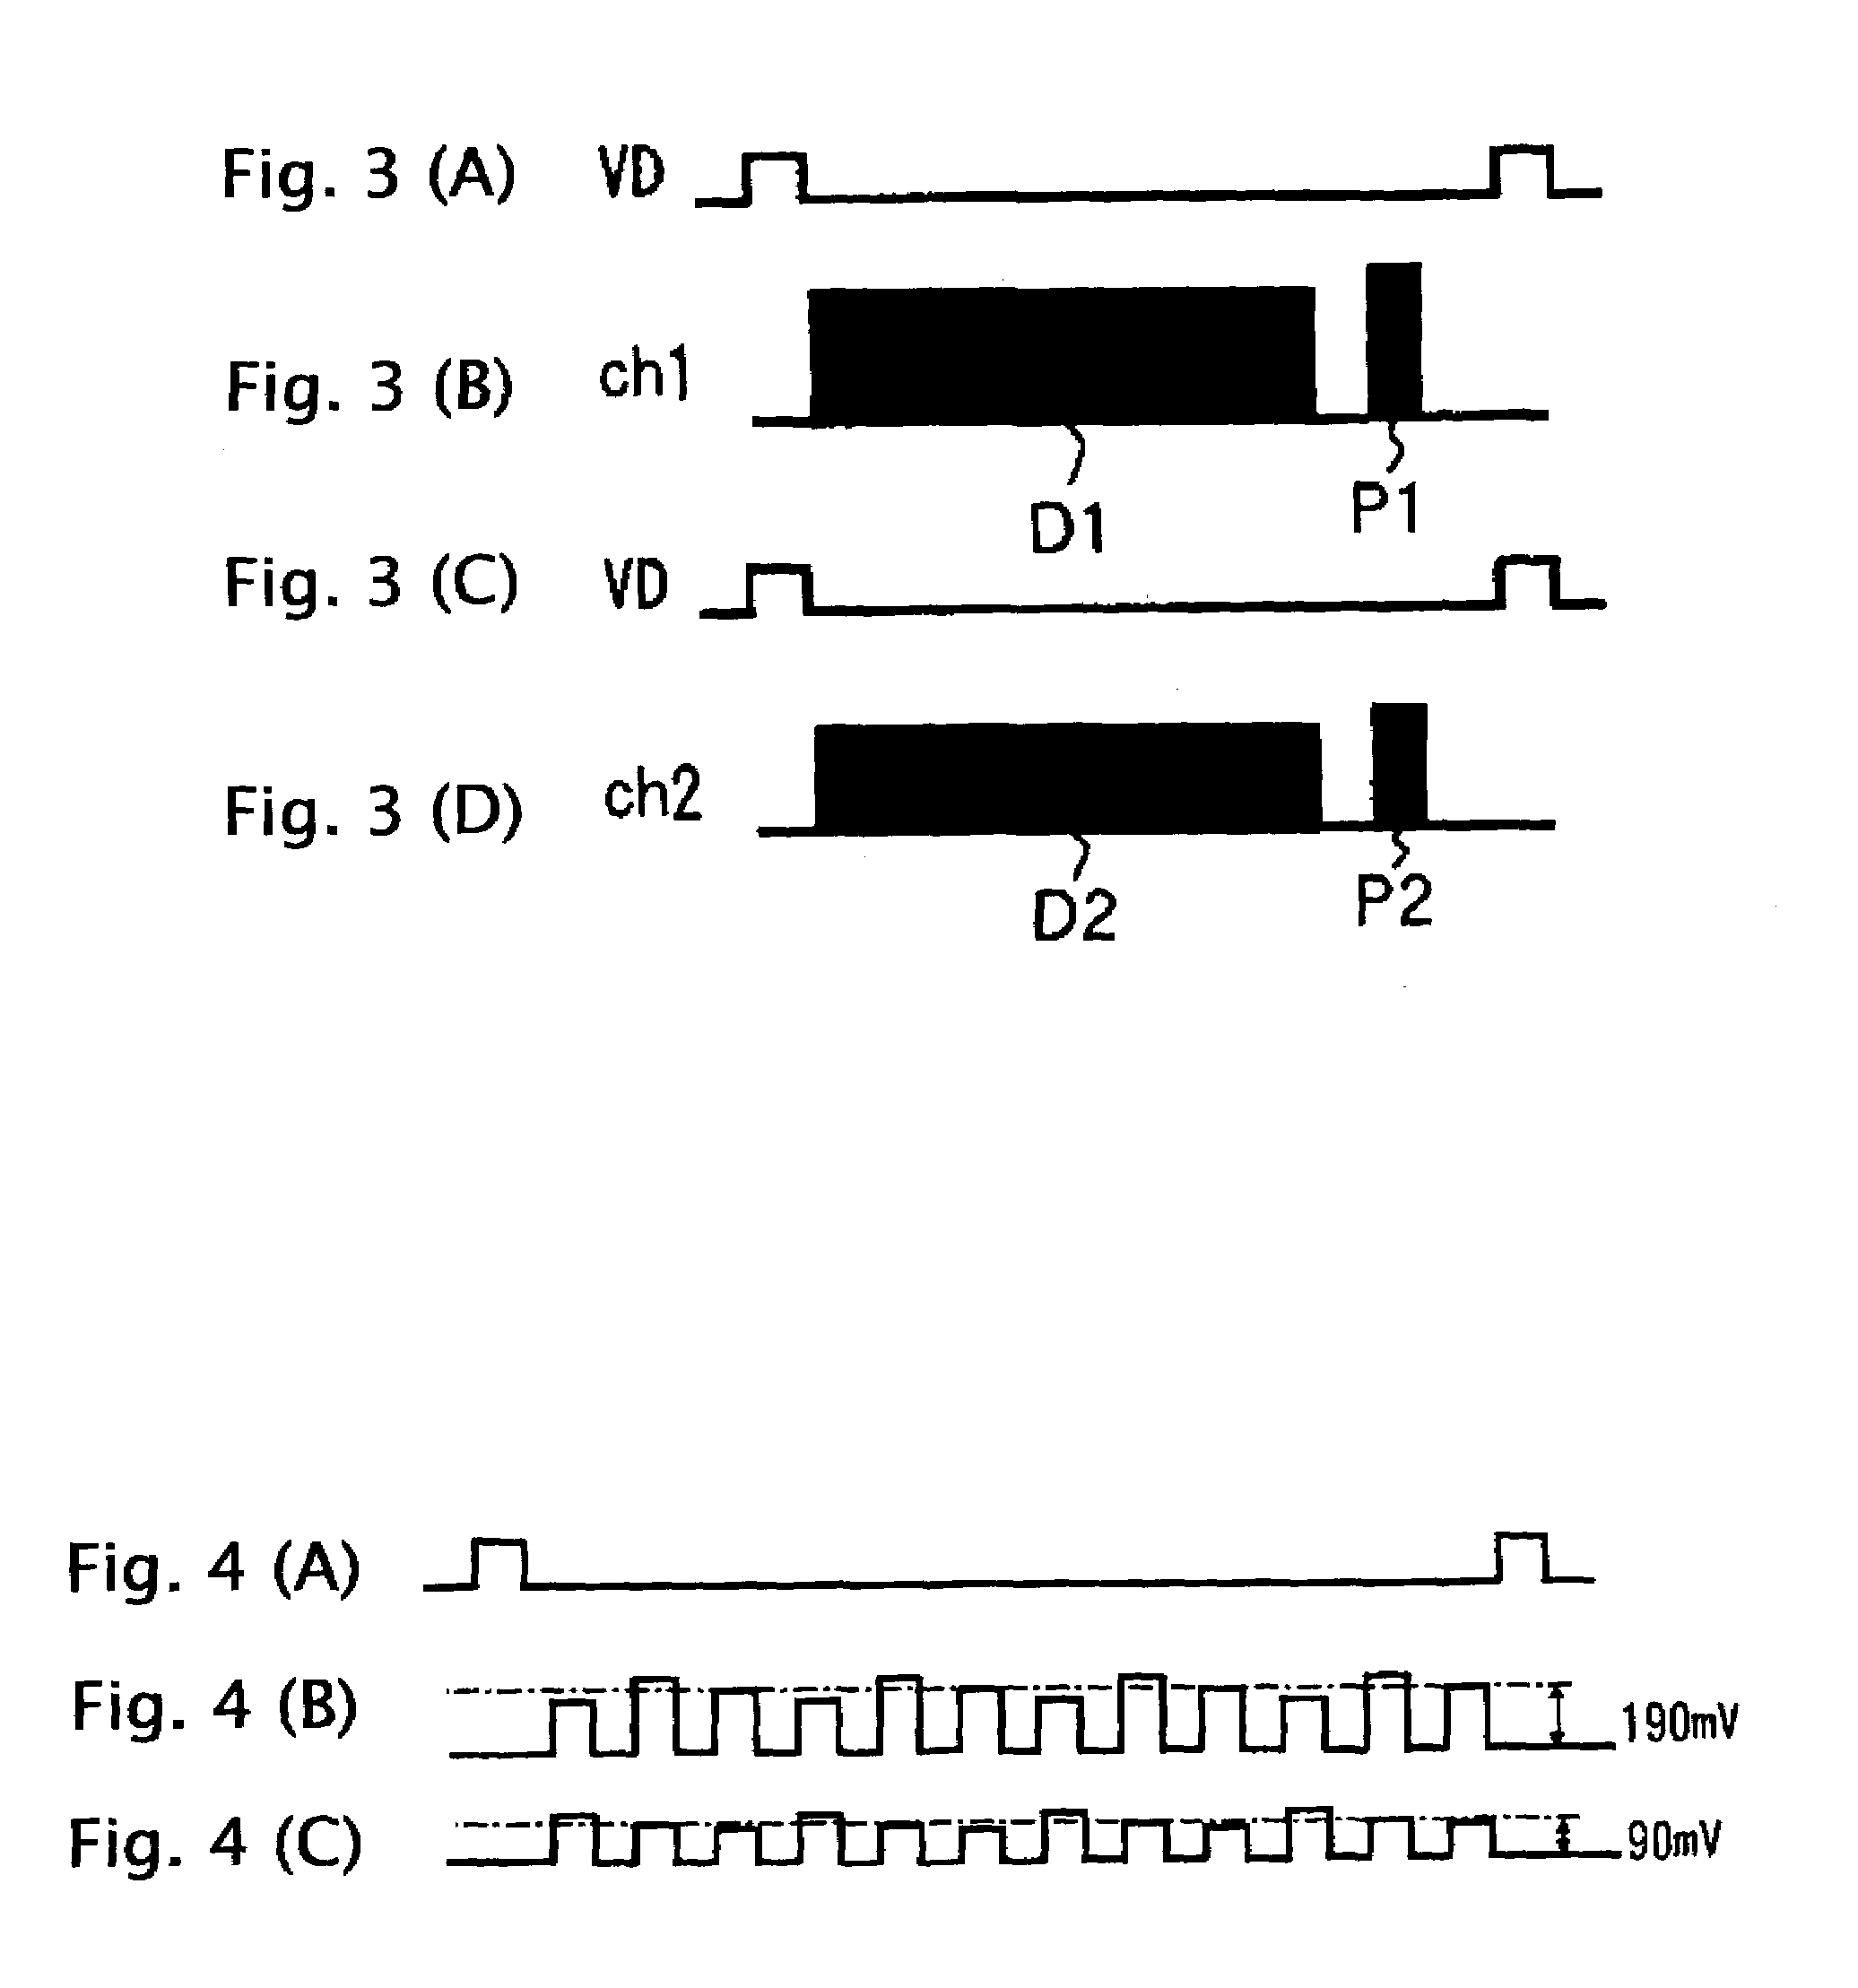 Image-sensing apparatus for compensating video signal of a plurality of channels